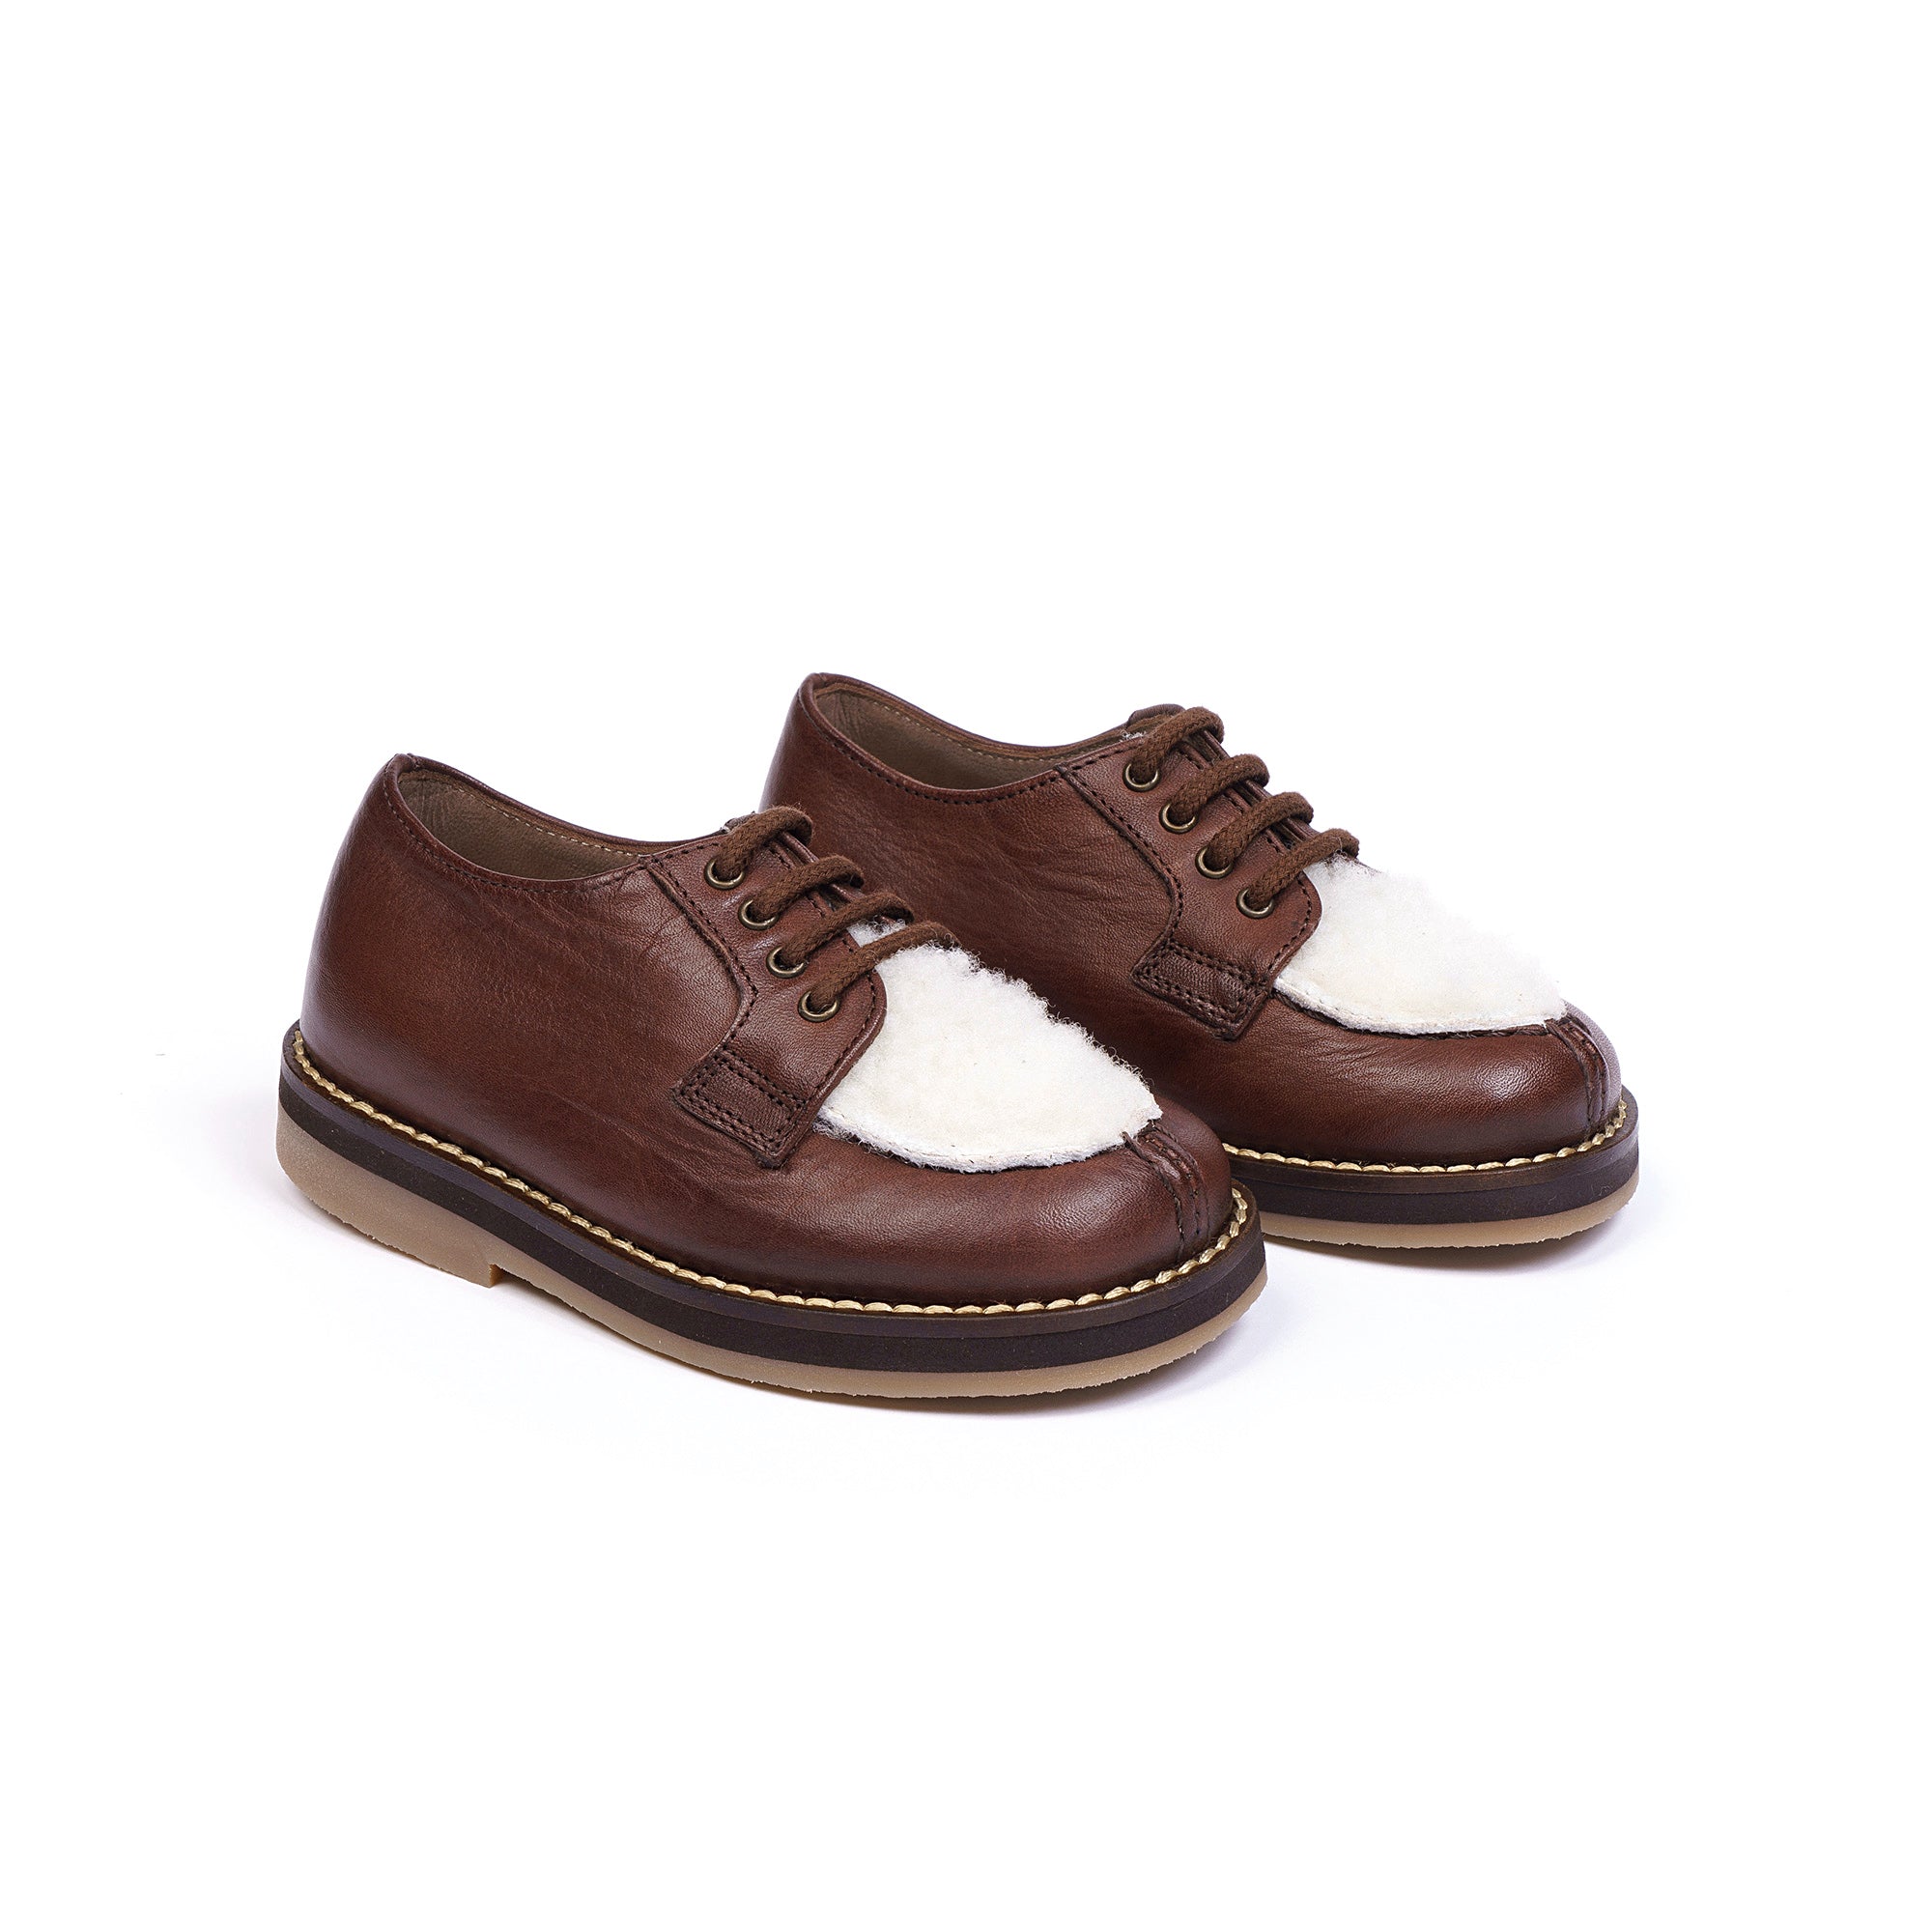 Boys Brown Shoes